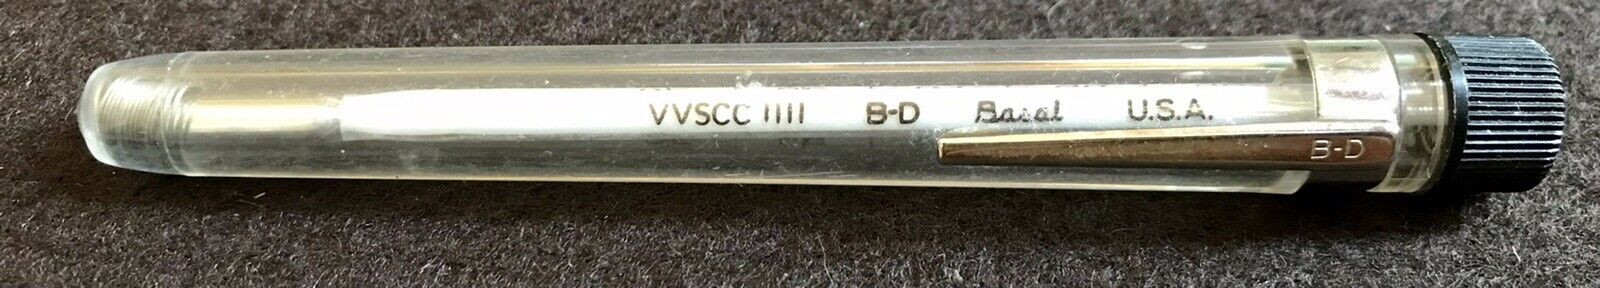 B-D BASAL THERMOMETER temperature VINTAGE Track Ovulation Fertility GLASS